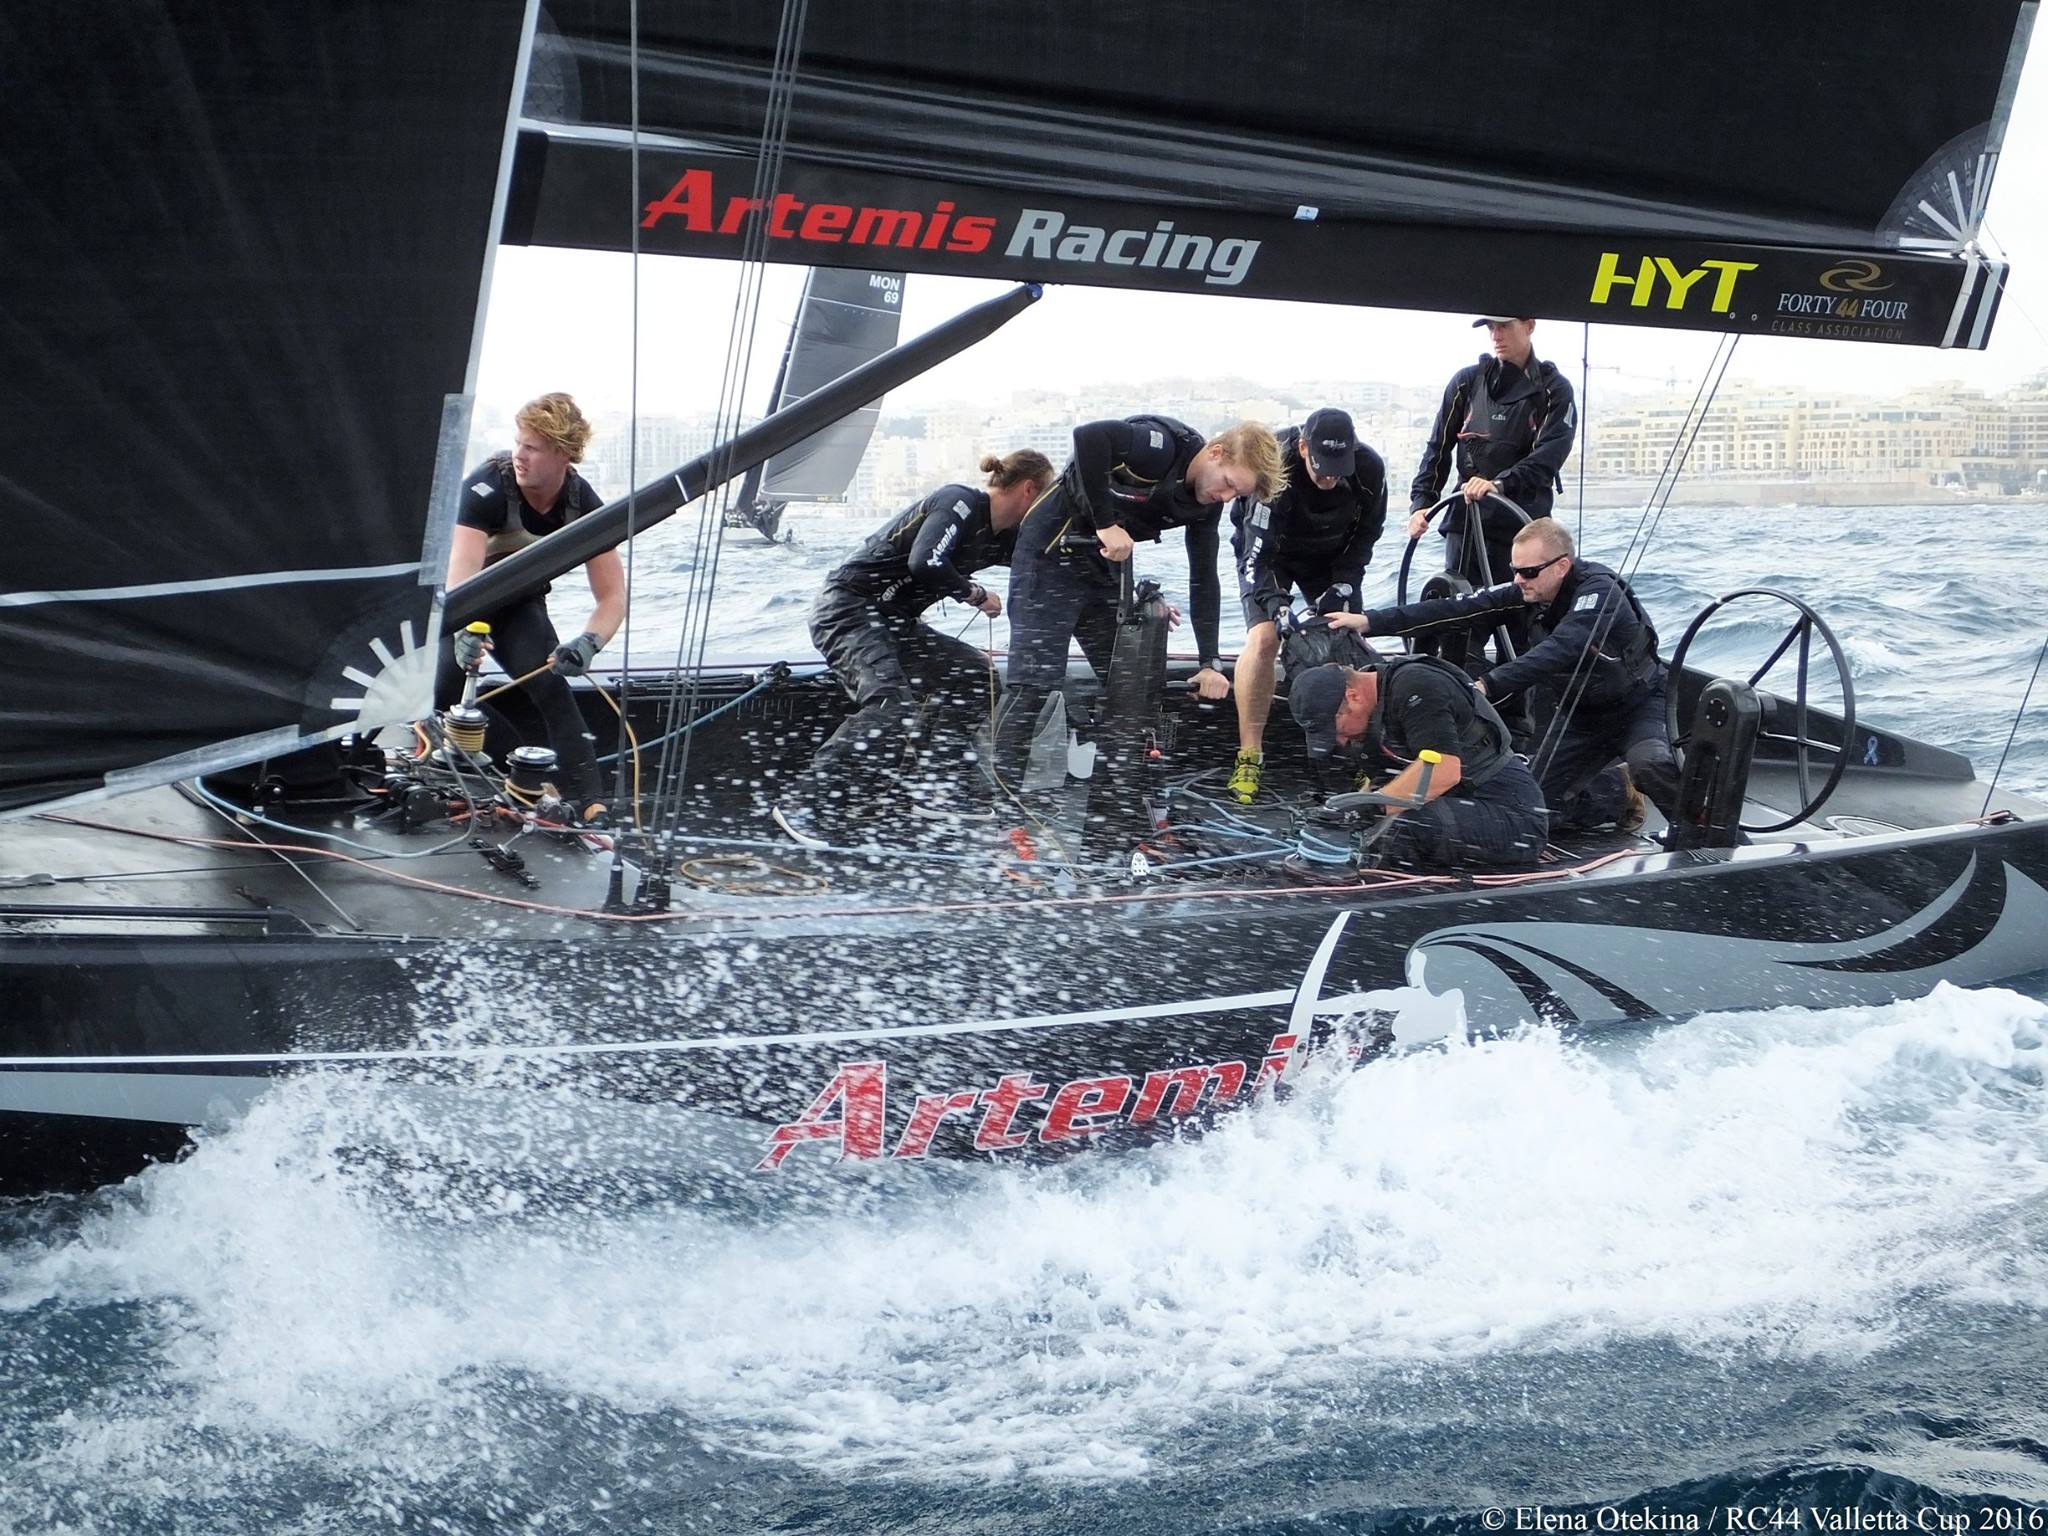 innovative and technical design present an exciting new hybrid sailing challenge